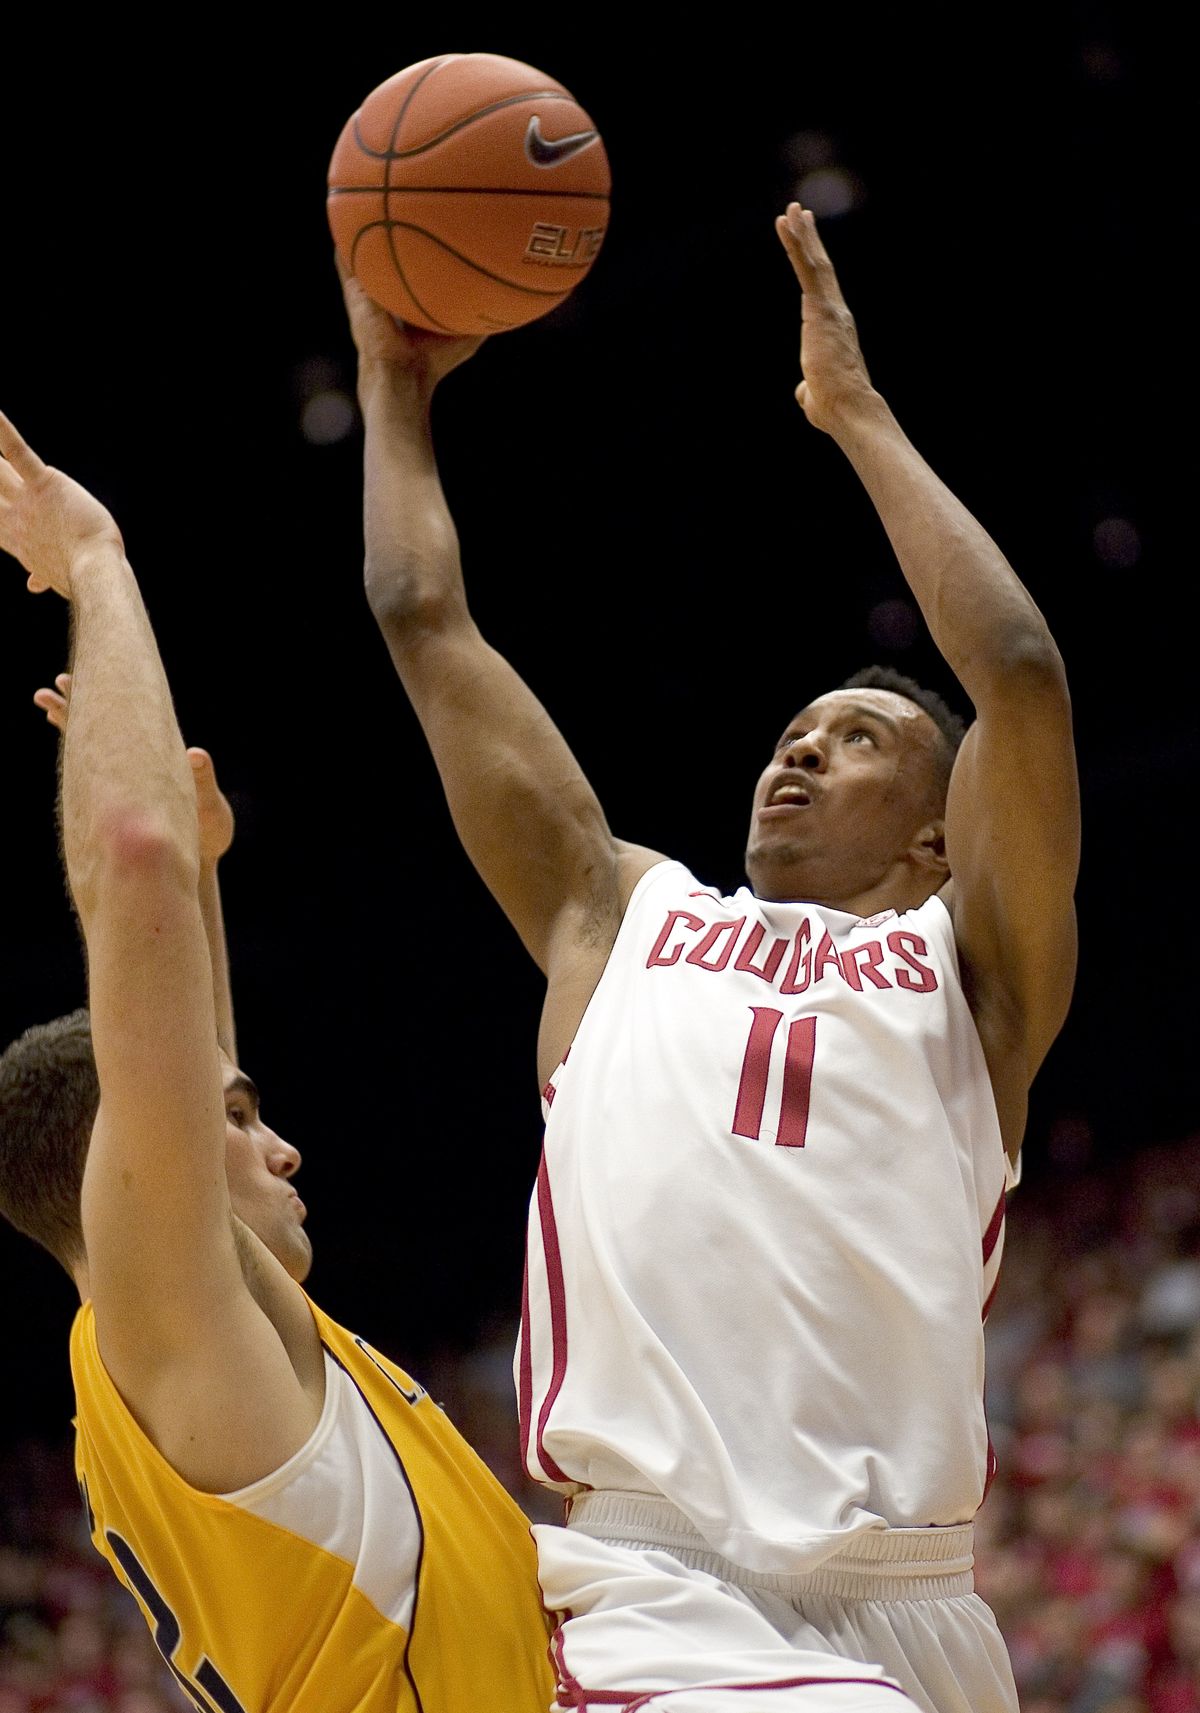 WSU’s Faisal Aden drives in for a layup over Cal’s Harper Kamp. Aden had a game-high 24 points. (Associated Press)